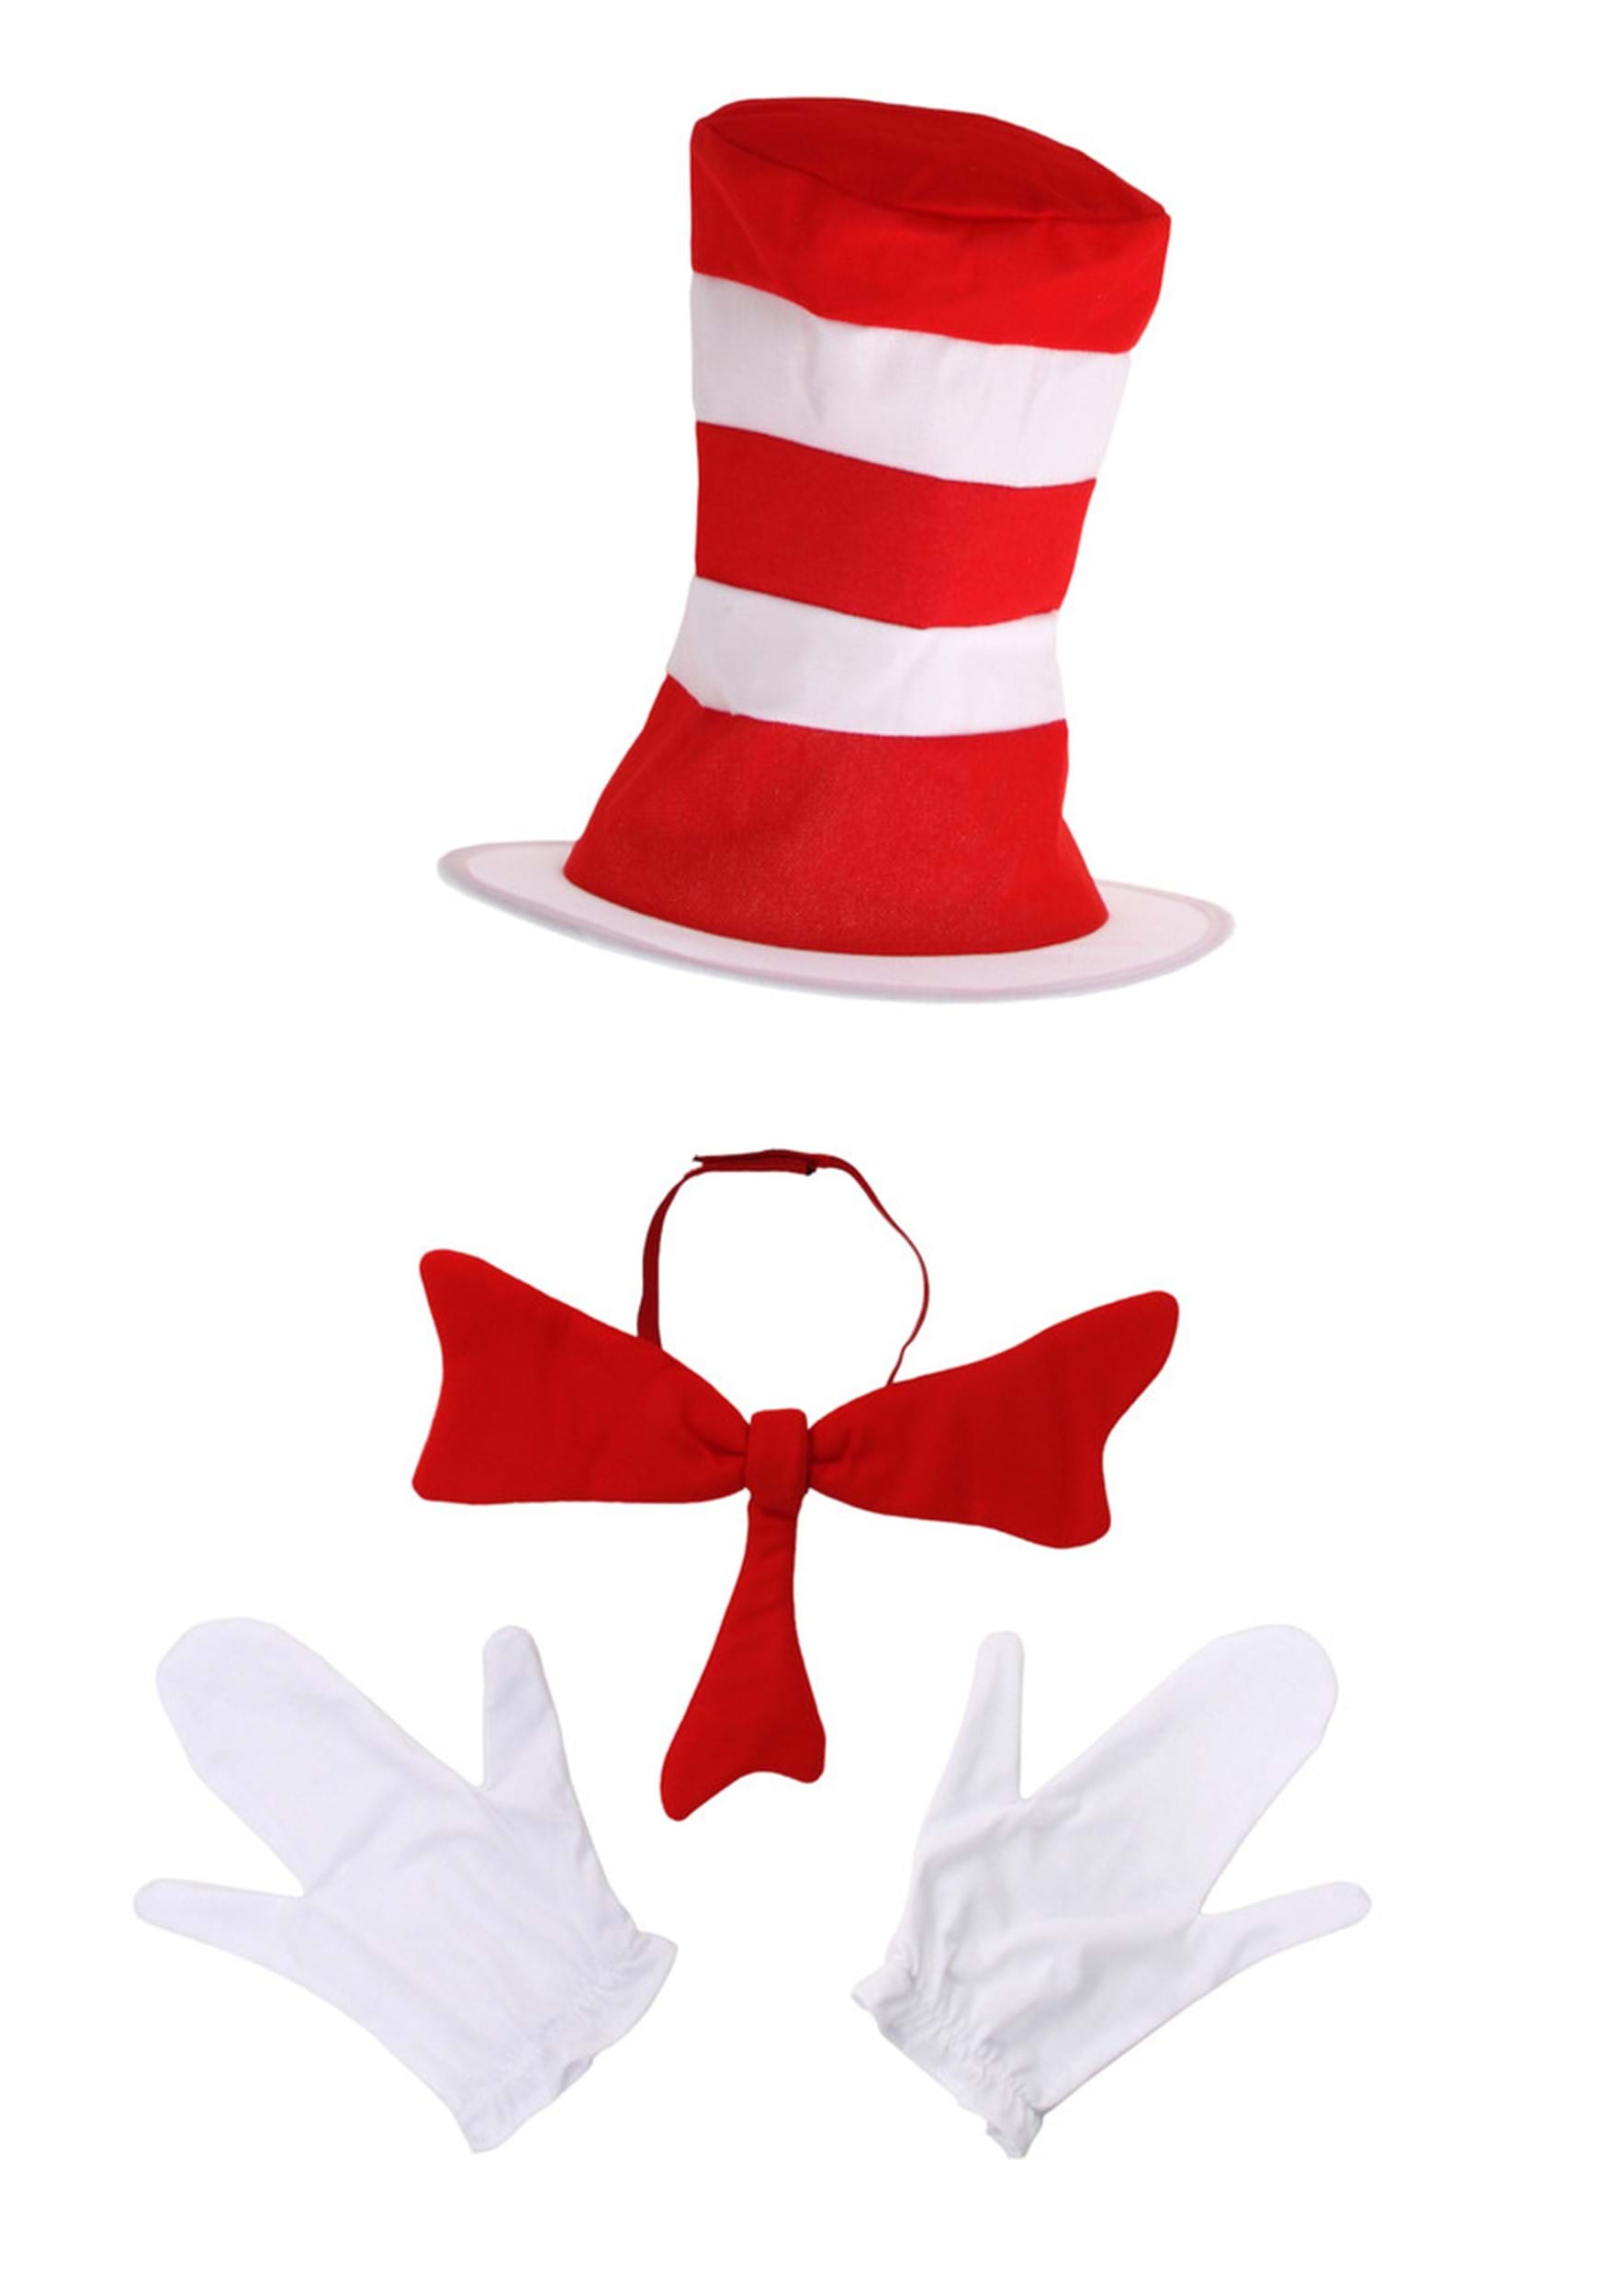 Storybook Cat in the Hat Costume Accessory Kit for Adults